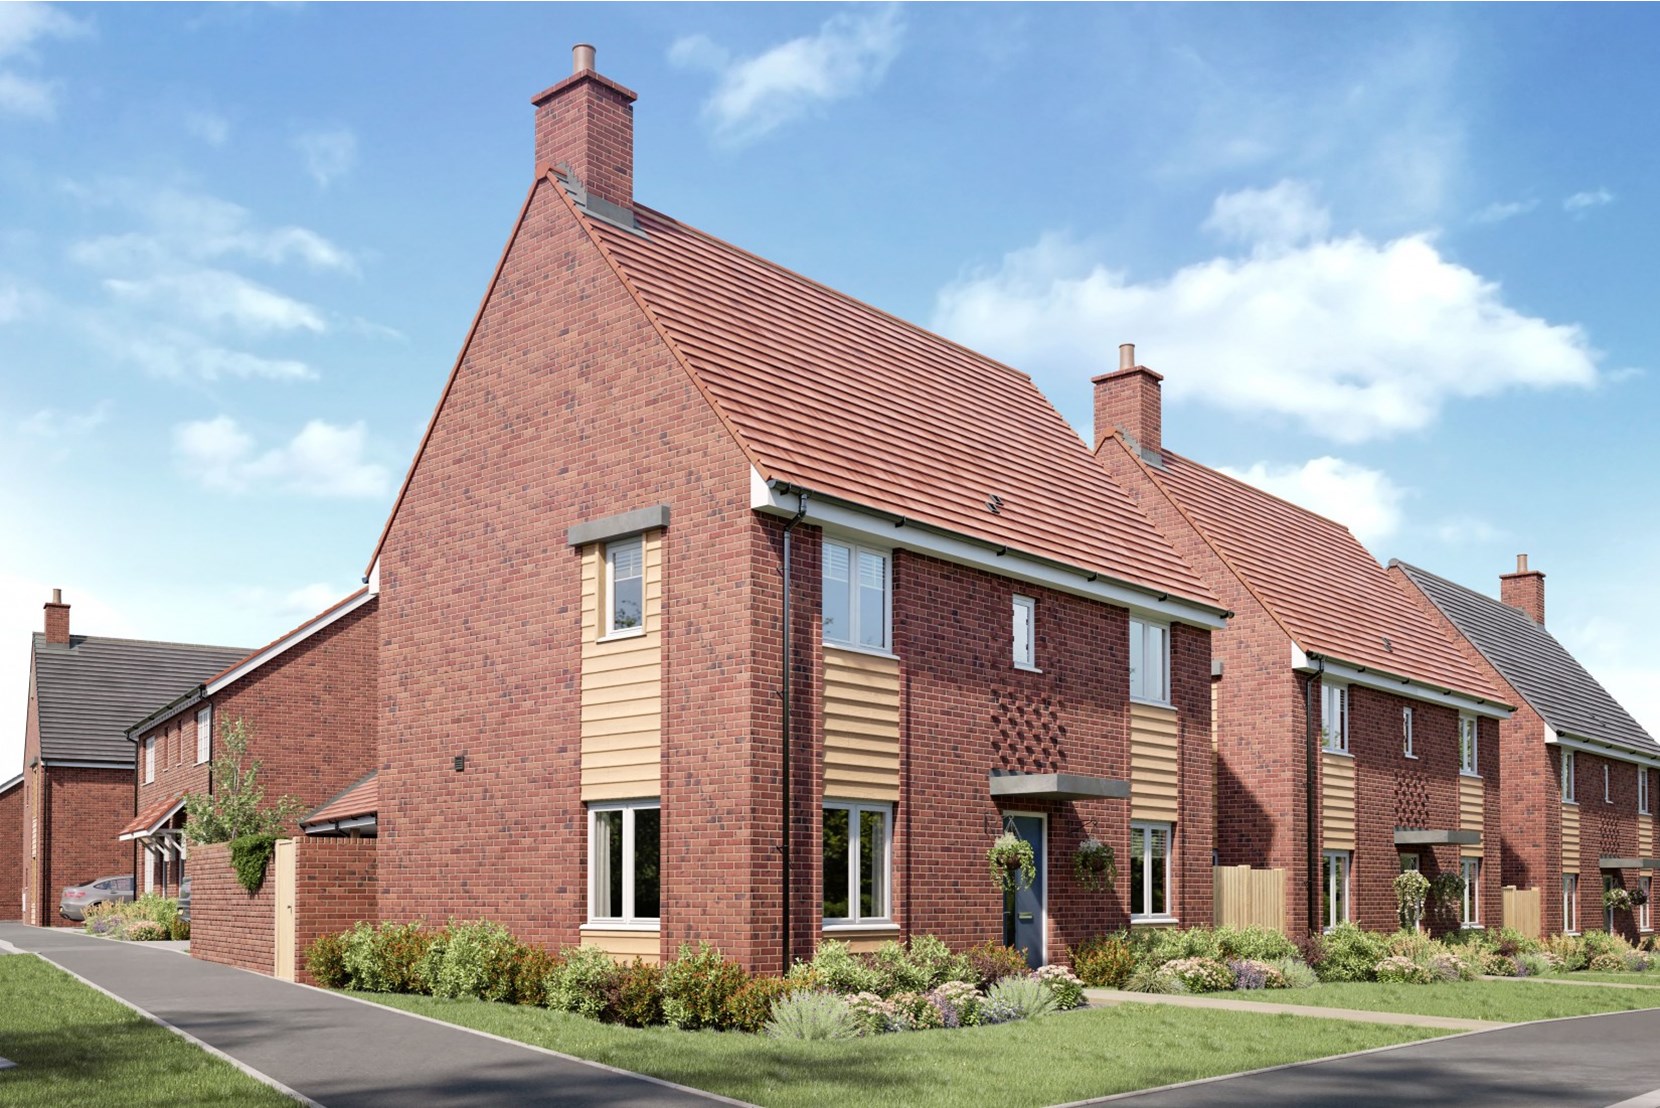 Homes to Rent by Allsop at Spinning Fields, Braintree, Essex, CM7, Muga house type CGI